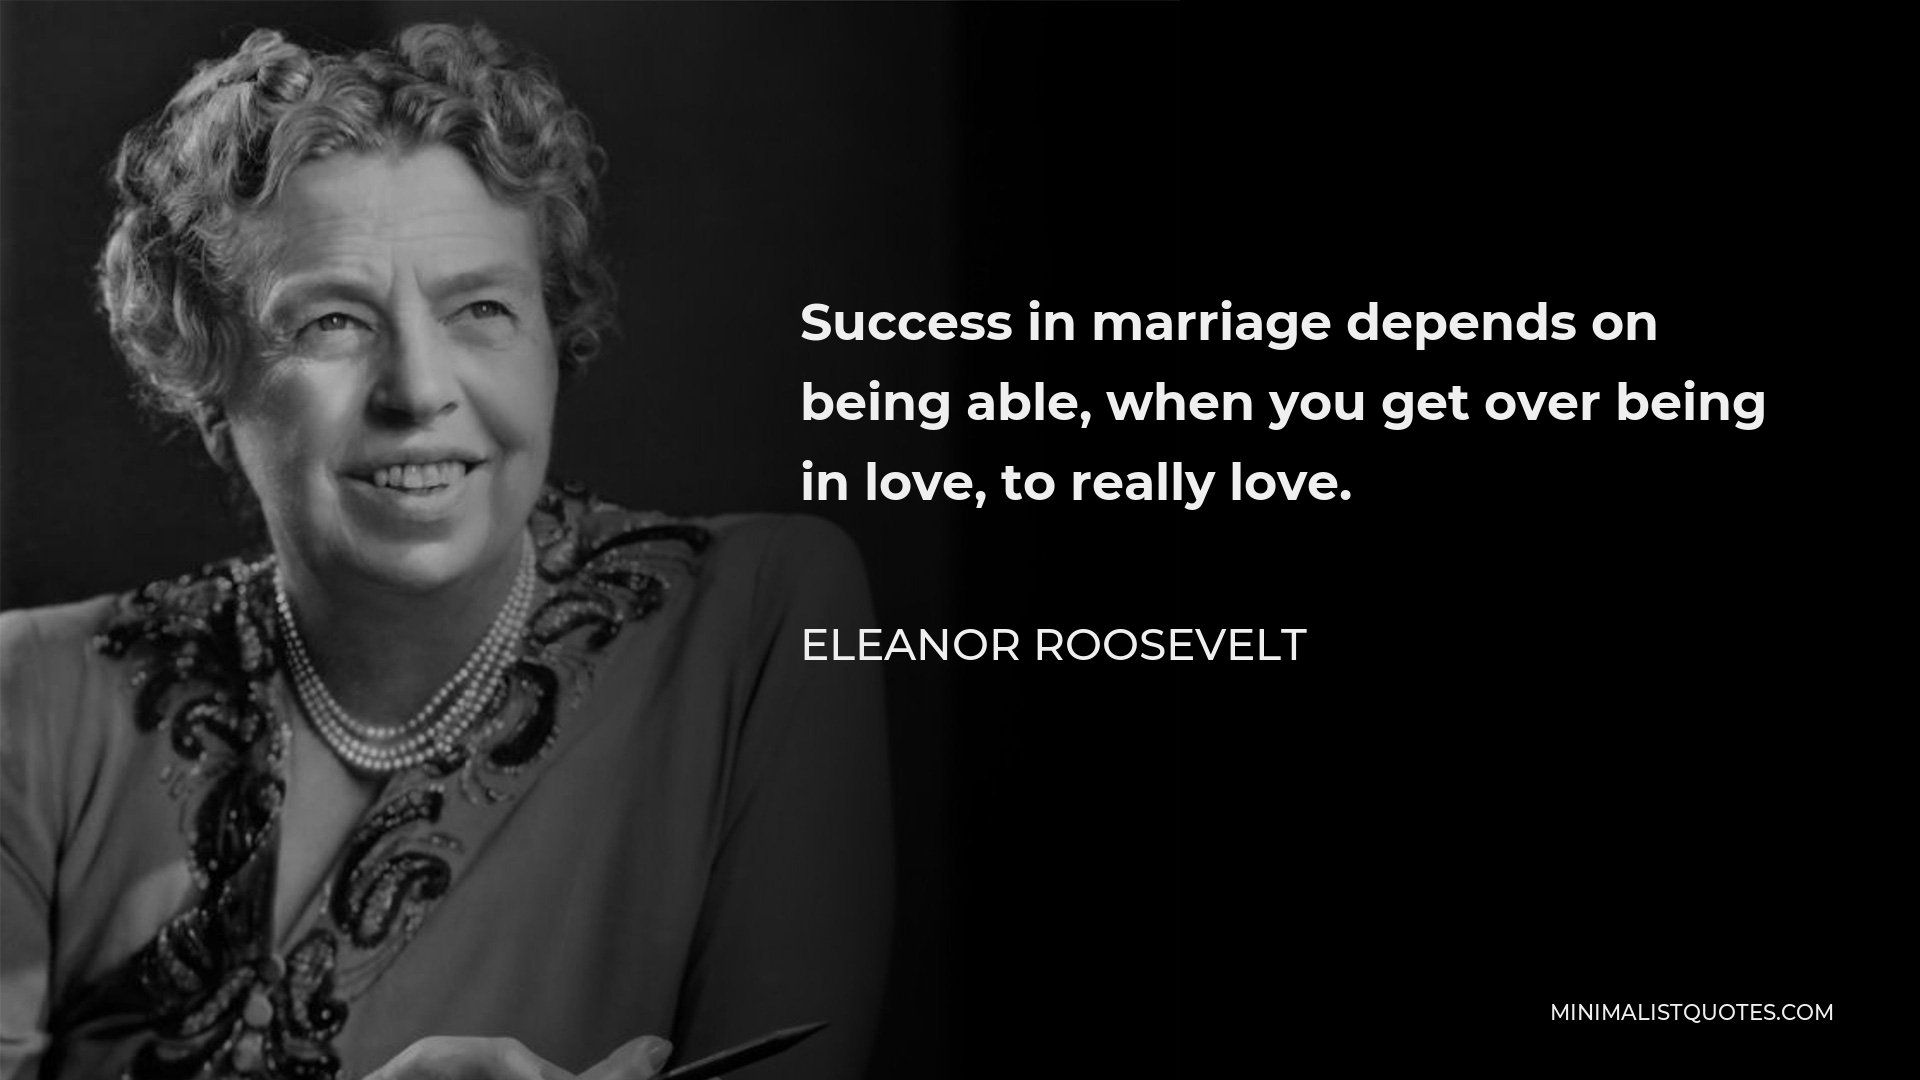 Eleanor Roosevelt Quote - Success in marriage depends on being able, when you get over being in love, to really love.